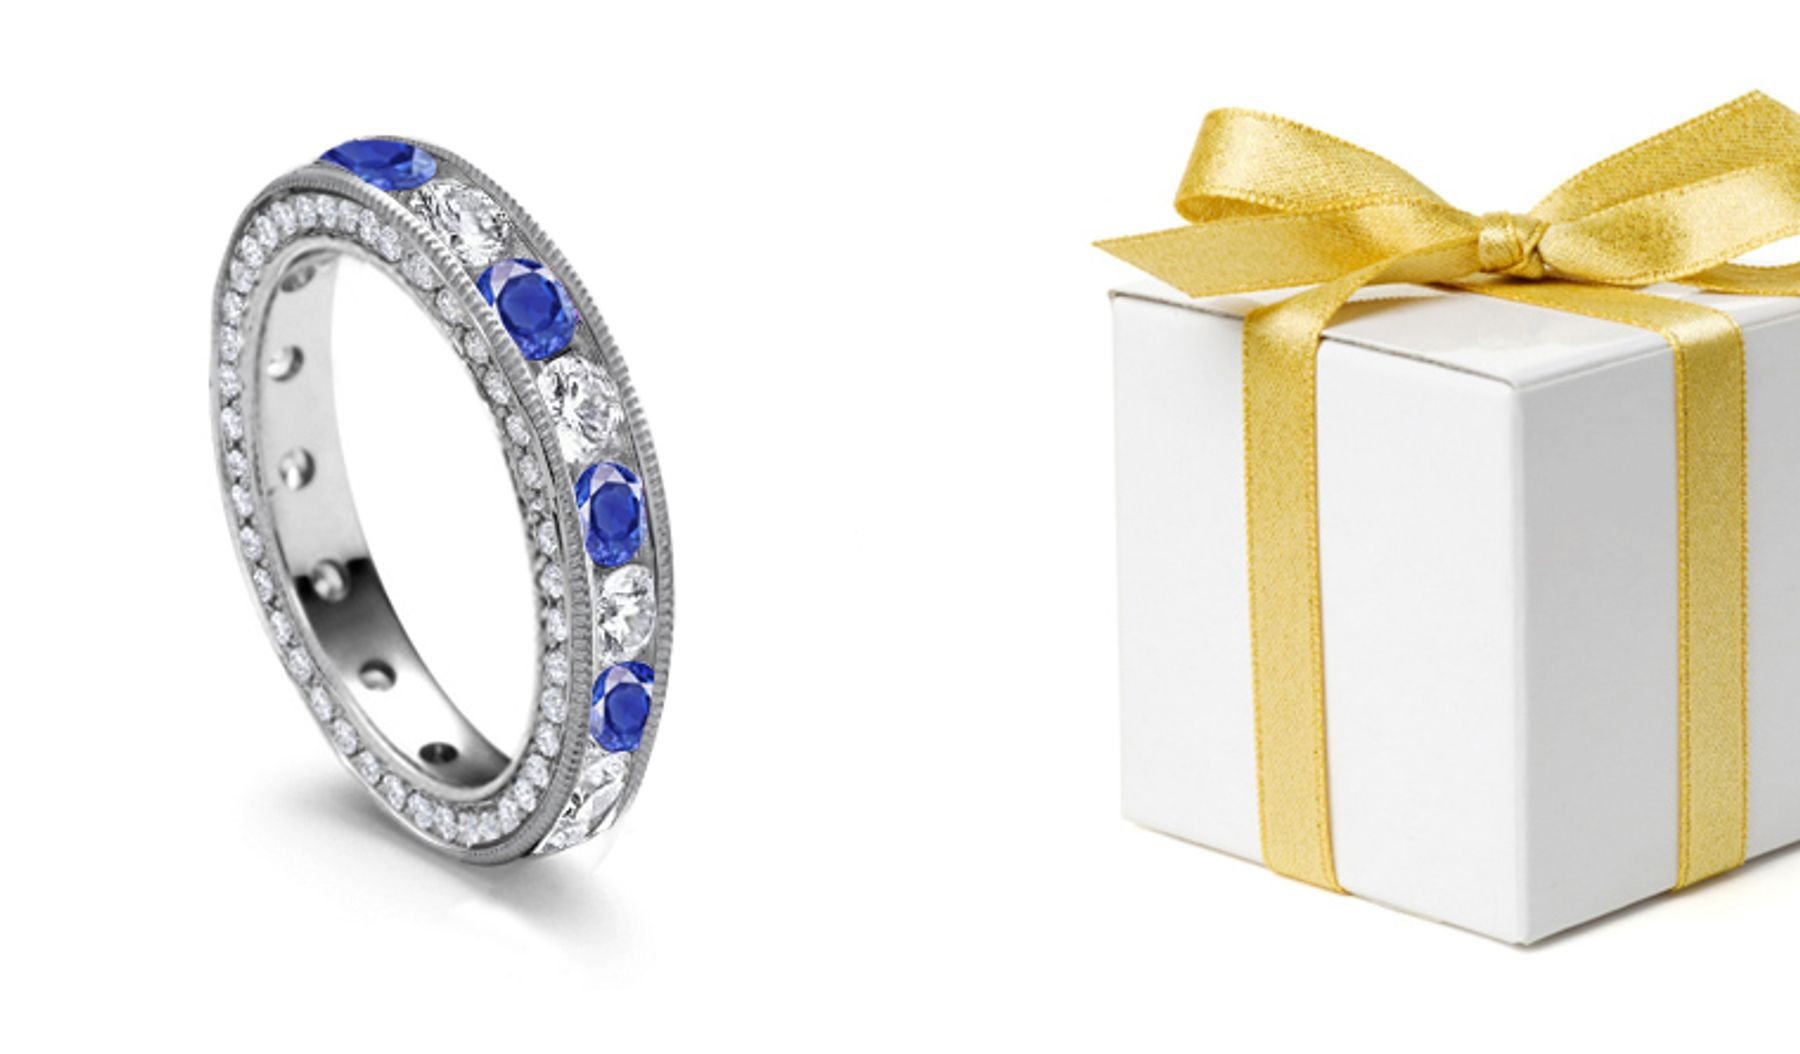 Round Diamonds & Blue Sapphires Channel Set Bordered by Fine Milgrain & Diamond Sprinkled Sides View from All Angles